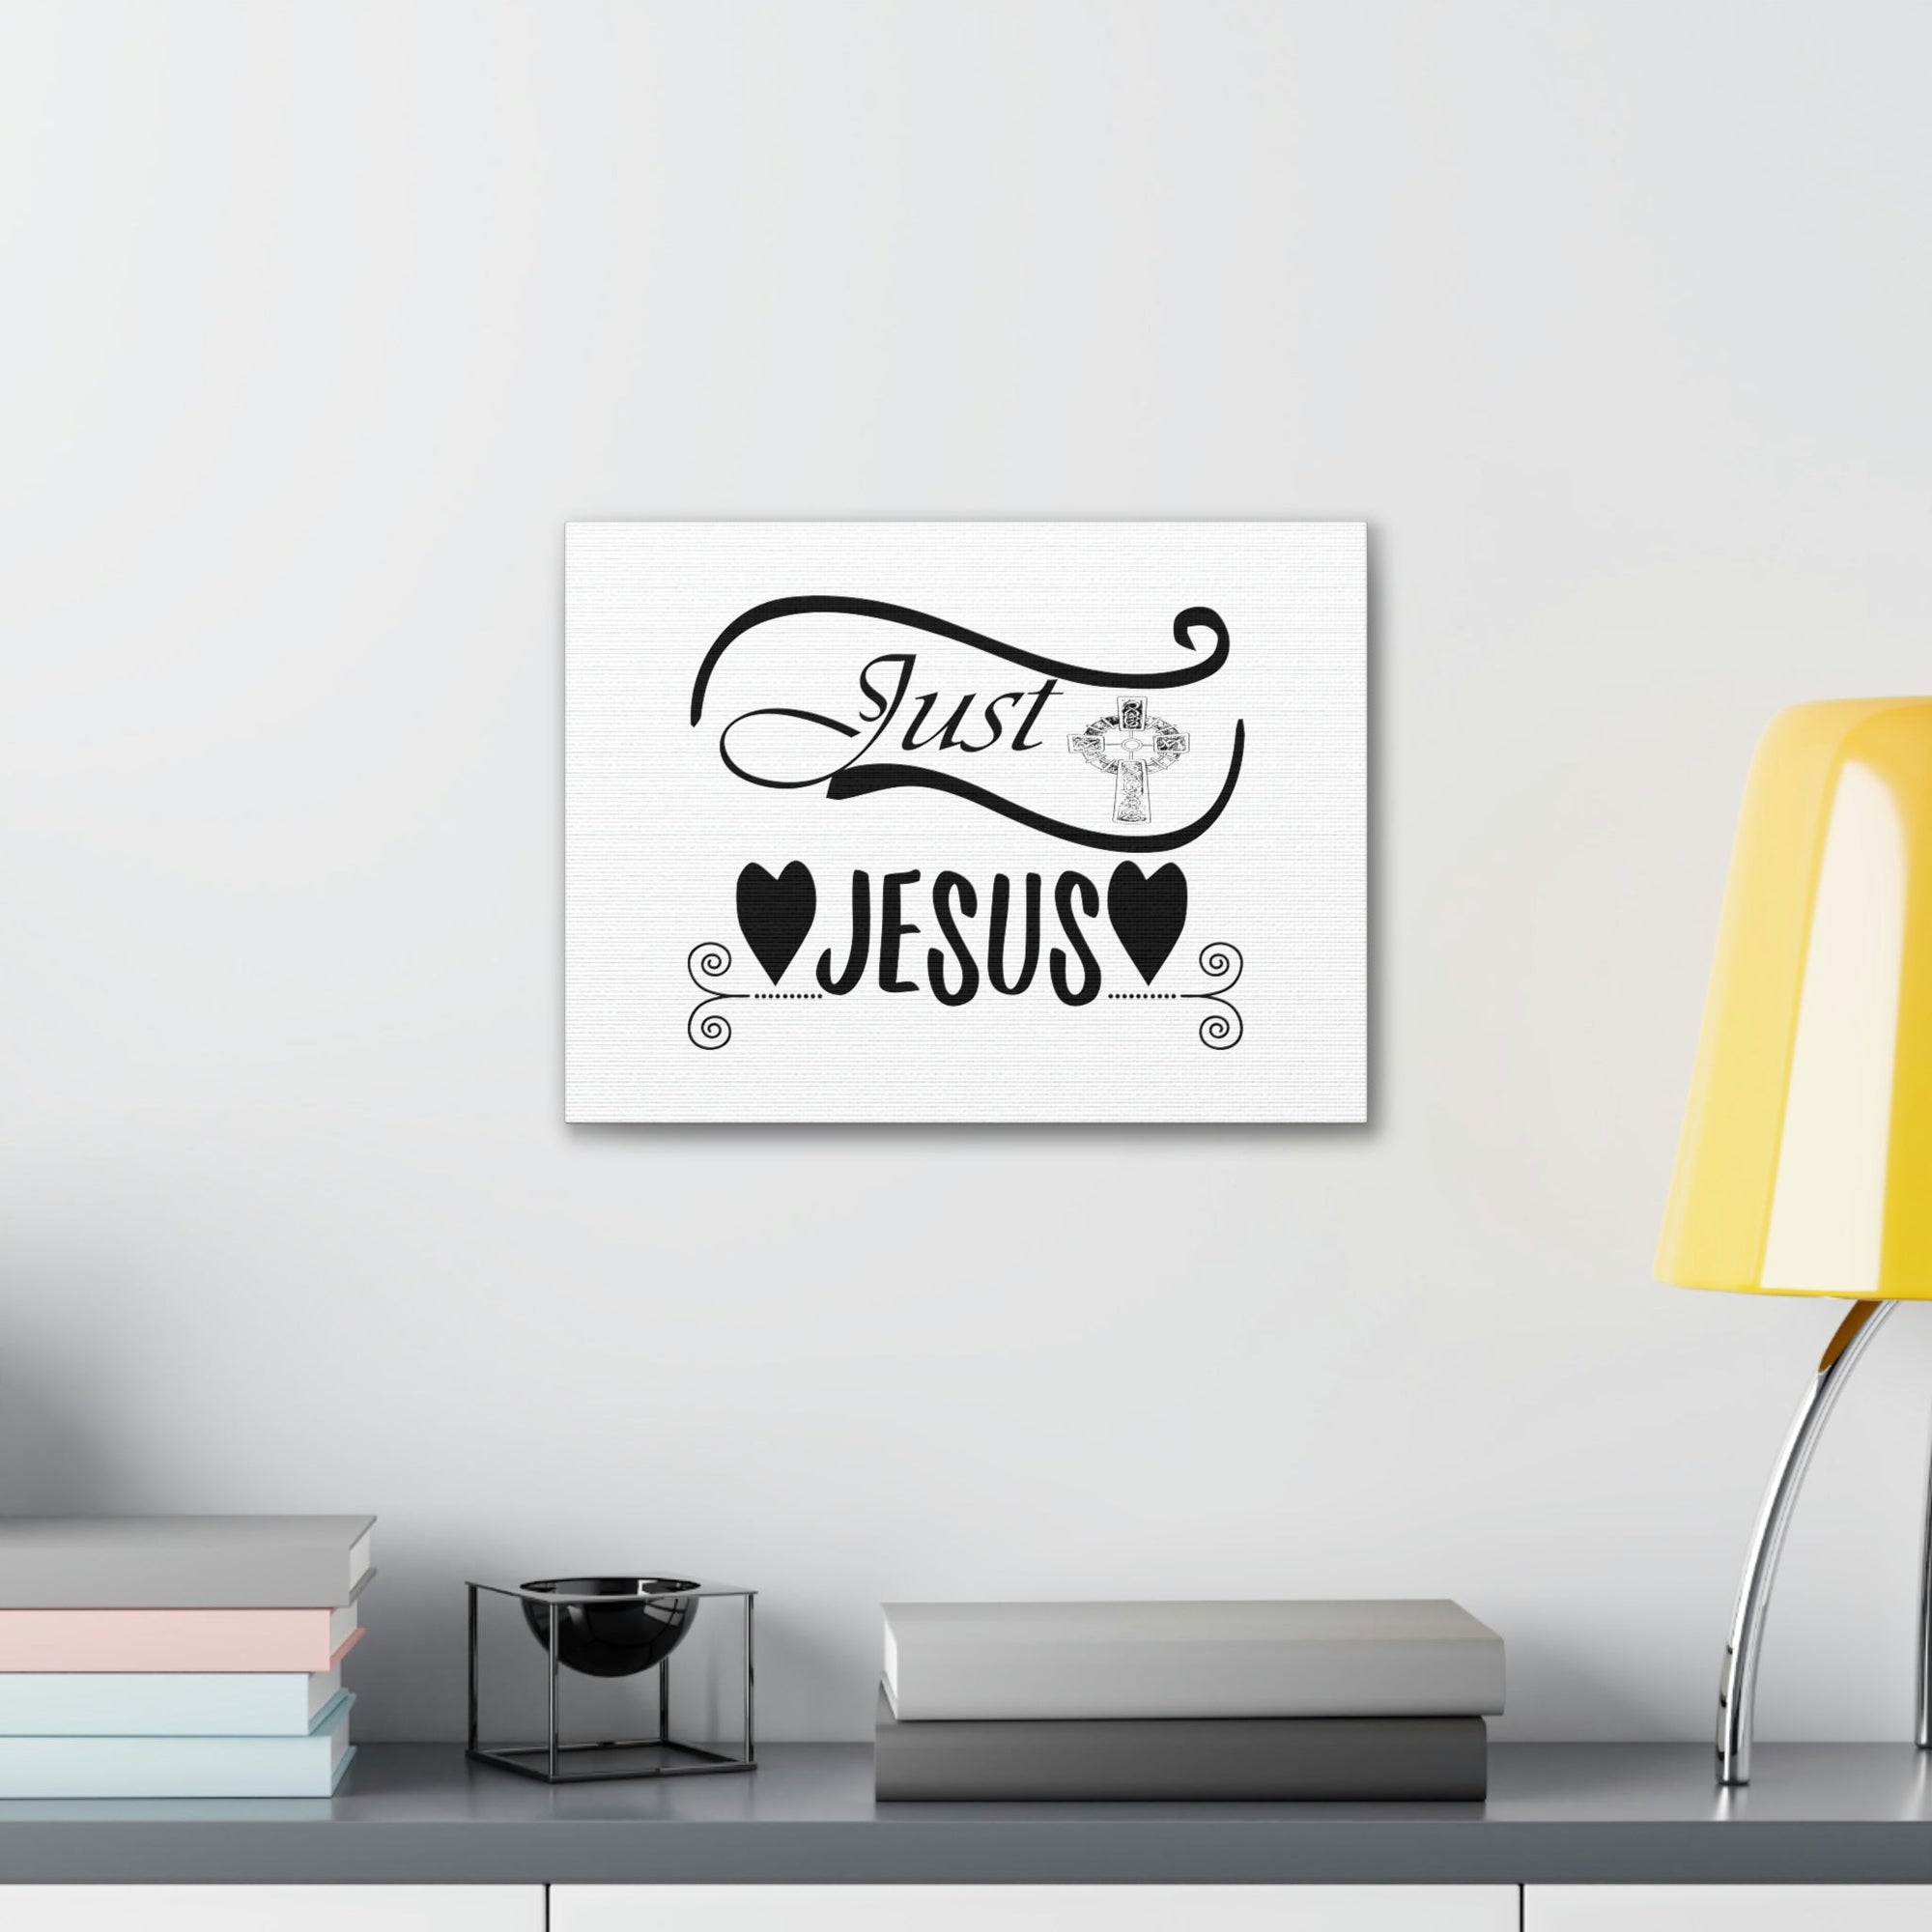 Scripture Walls Just Jesus John 14:6 Double Hearts Christian Wall Art Bible Verse Print Ready to Hang Unframed-Express Your Love Gifts